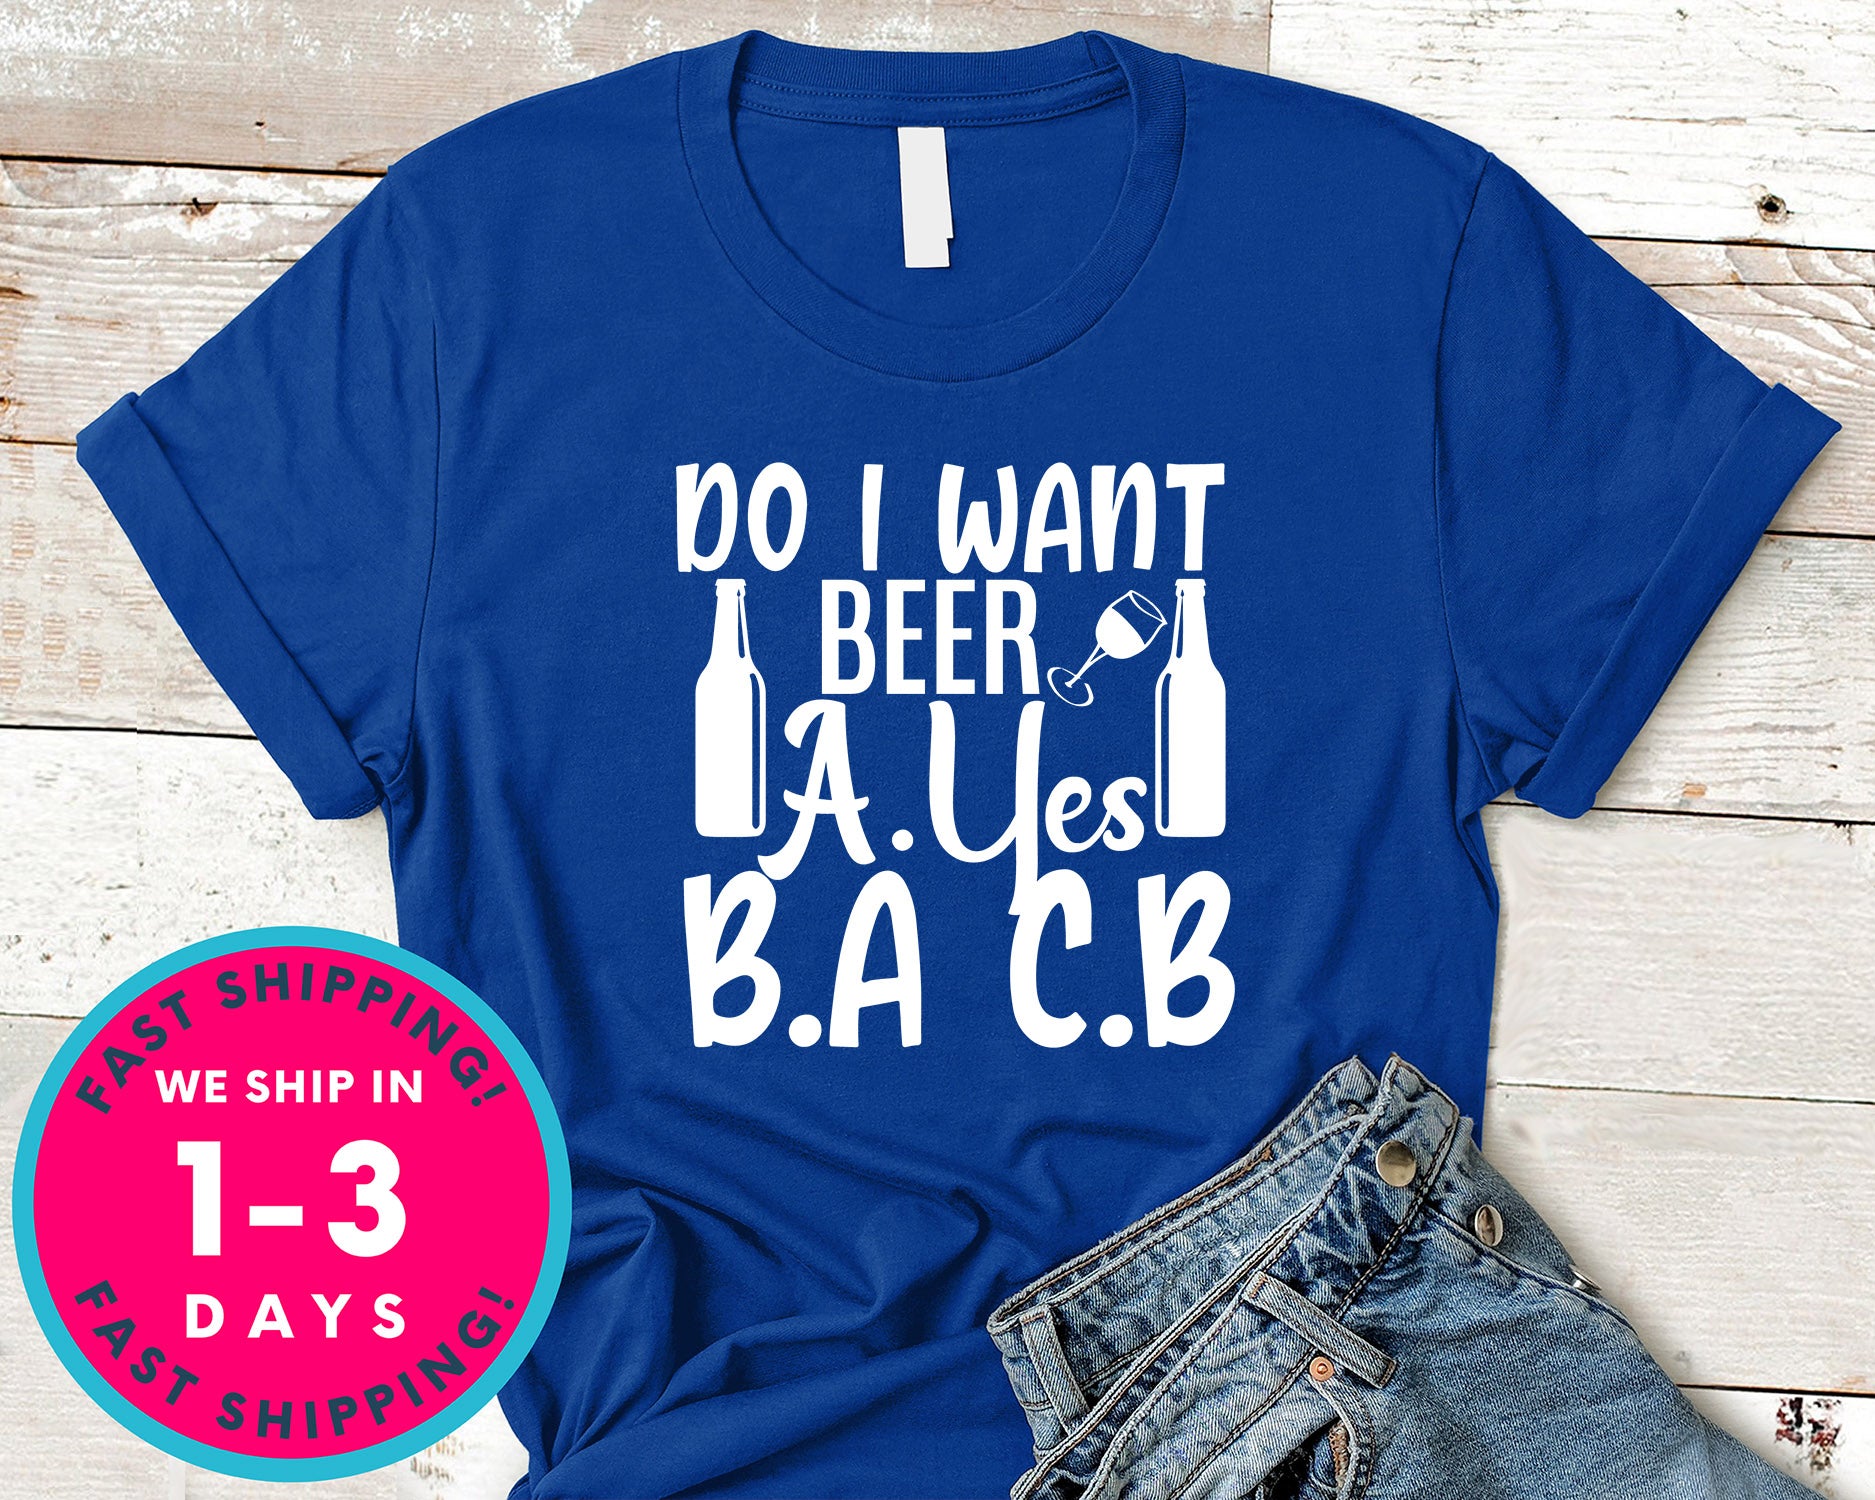 I Want Beer A.yes B.a C.b